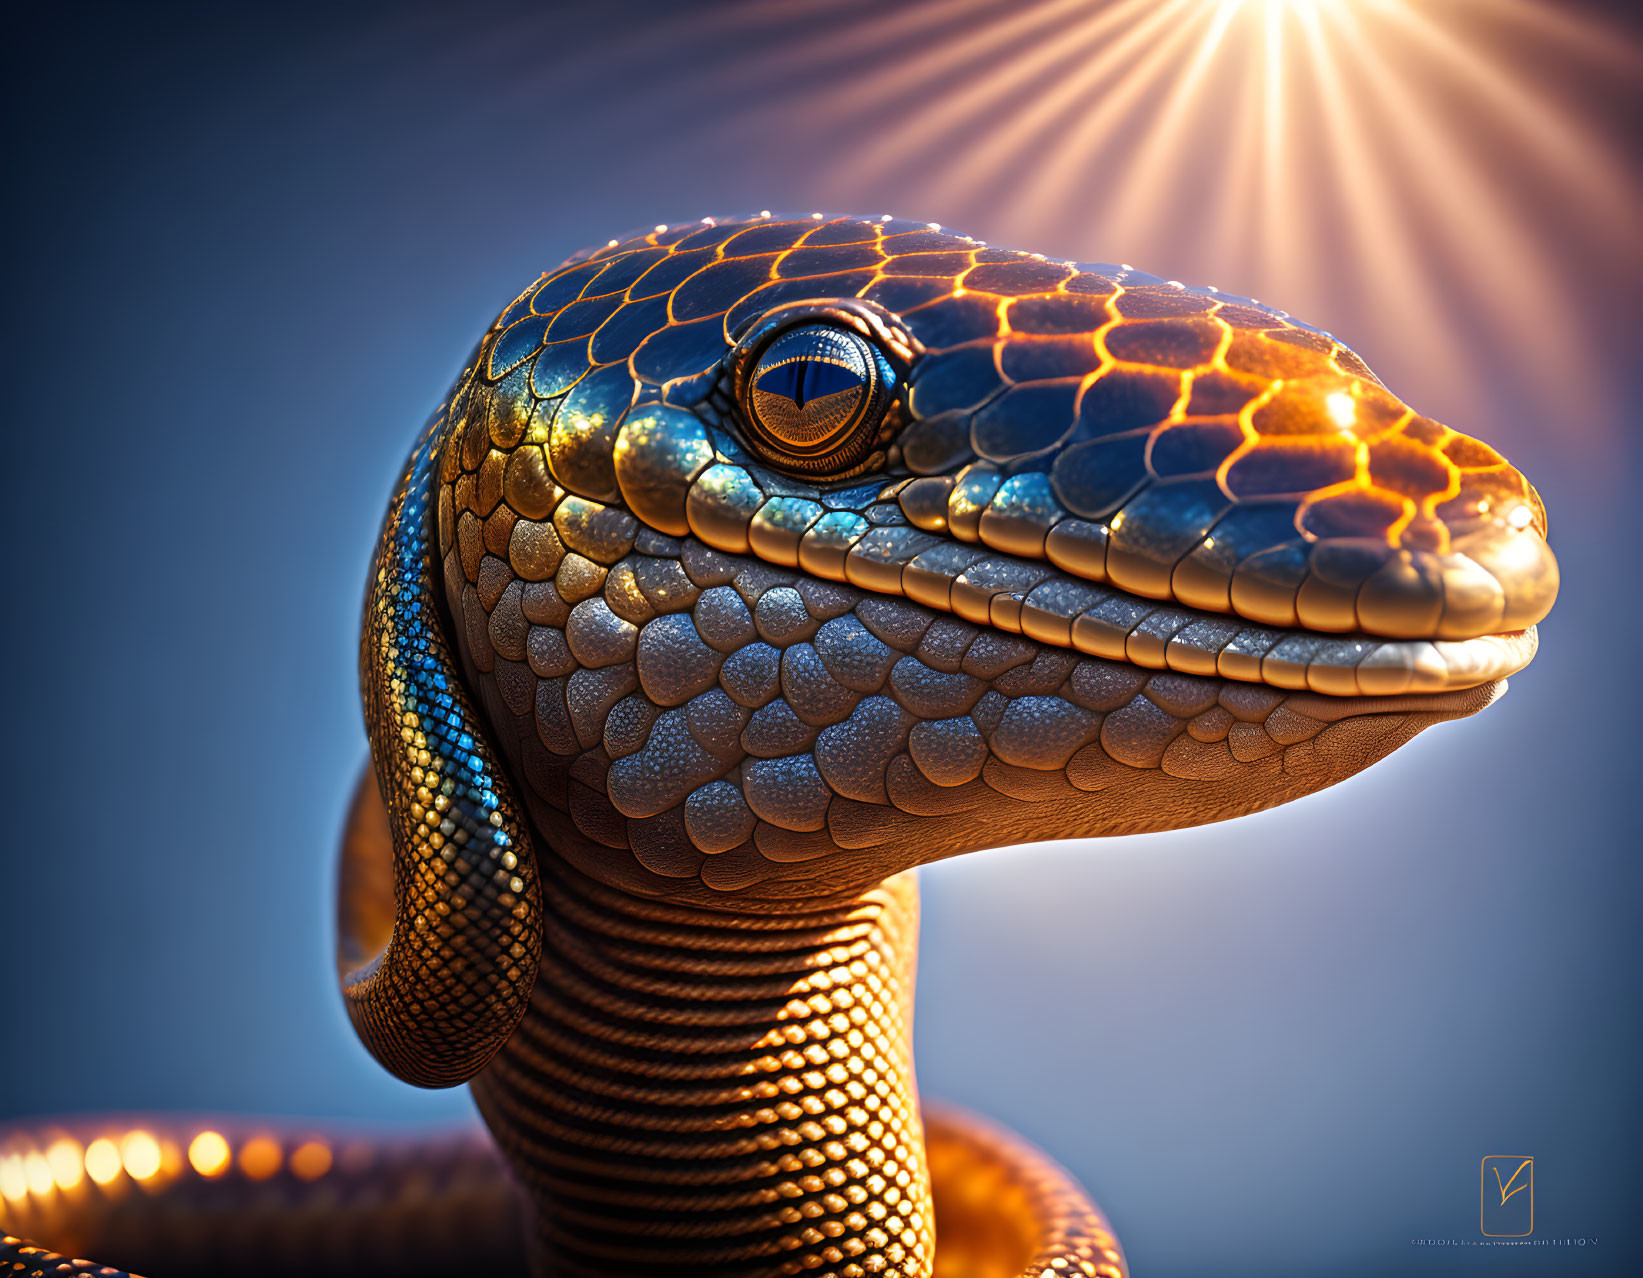 Detailed 3D-rendered lizard with shimmering scales on sunburst backdrop